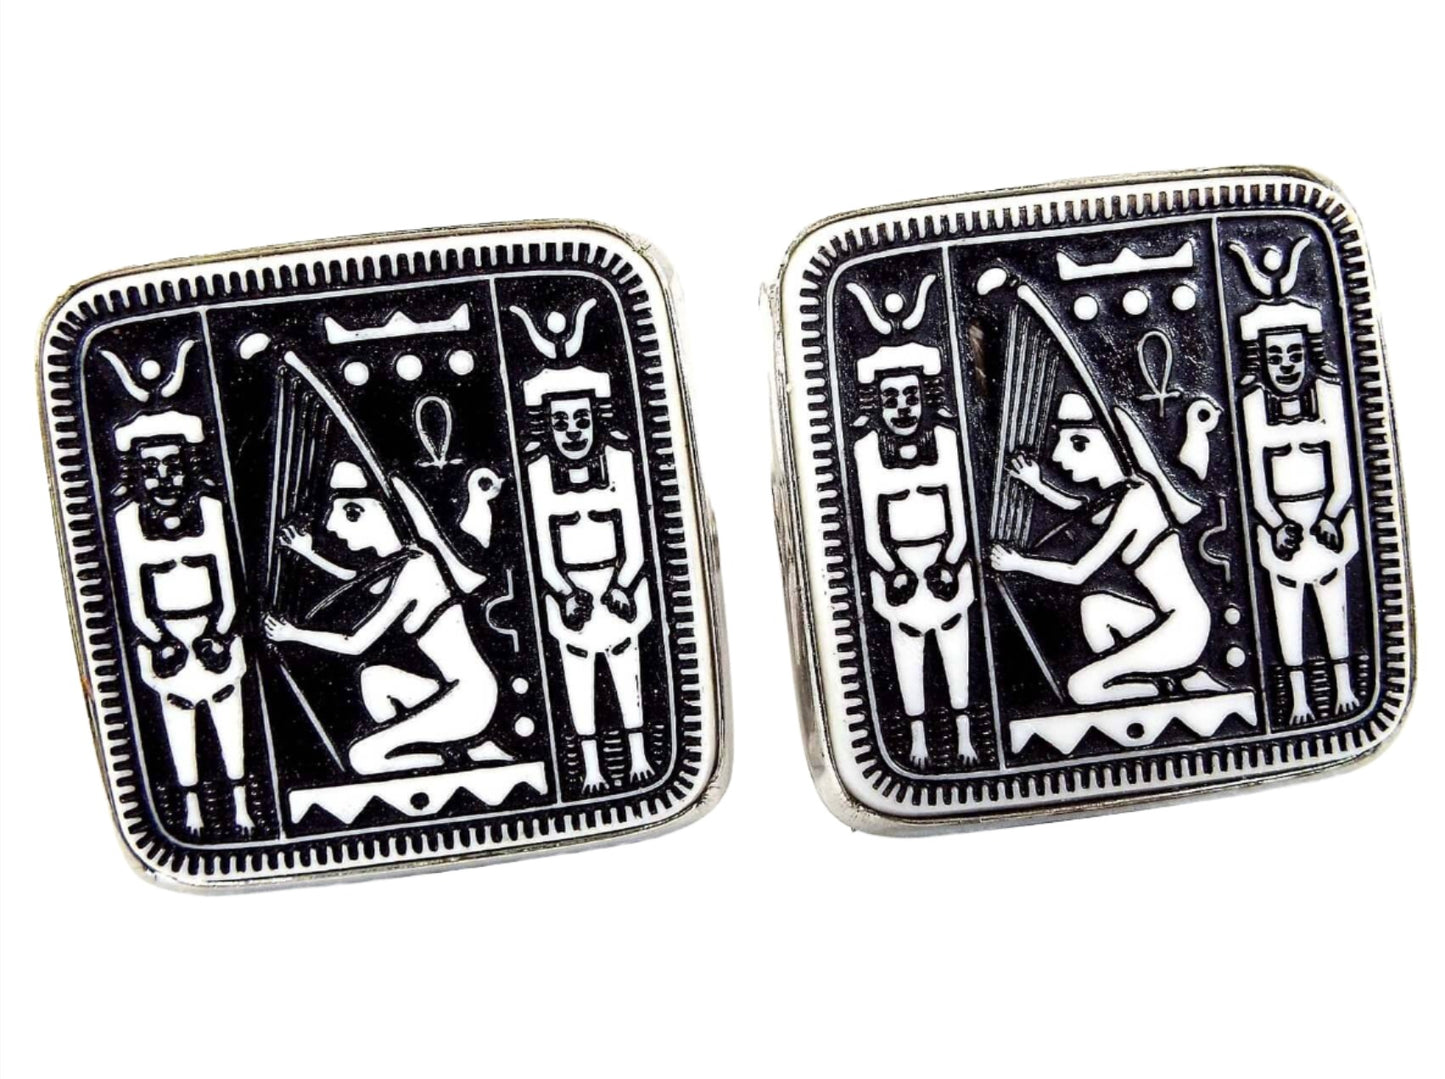 Front view of the Mid Century vintage Dante Egyptian Revival cufflnks. They are rounded square in shape with silver tone color metal. The front cabs are black with a white hieroglyphic style design. 